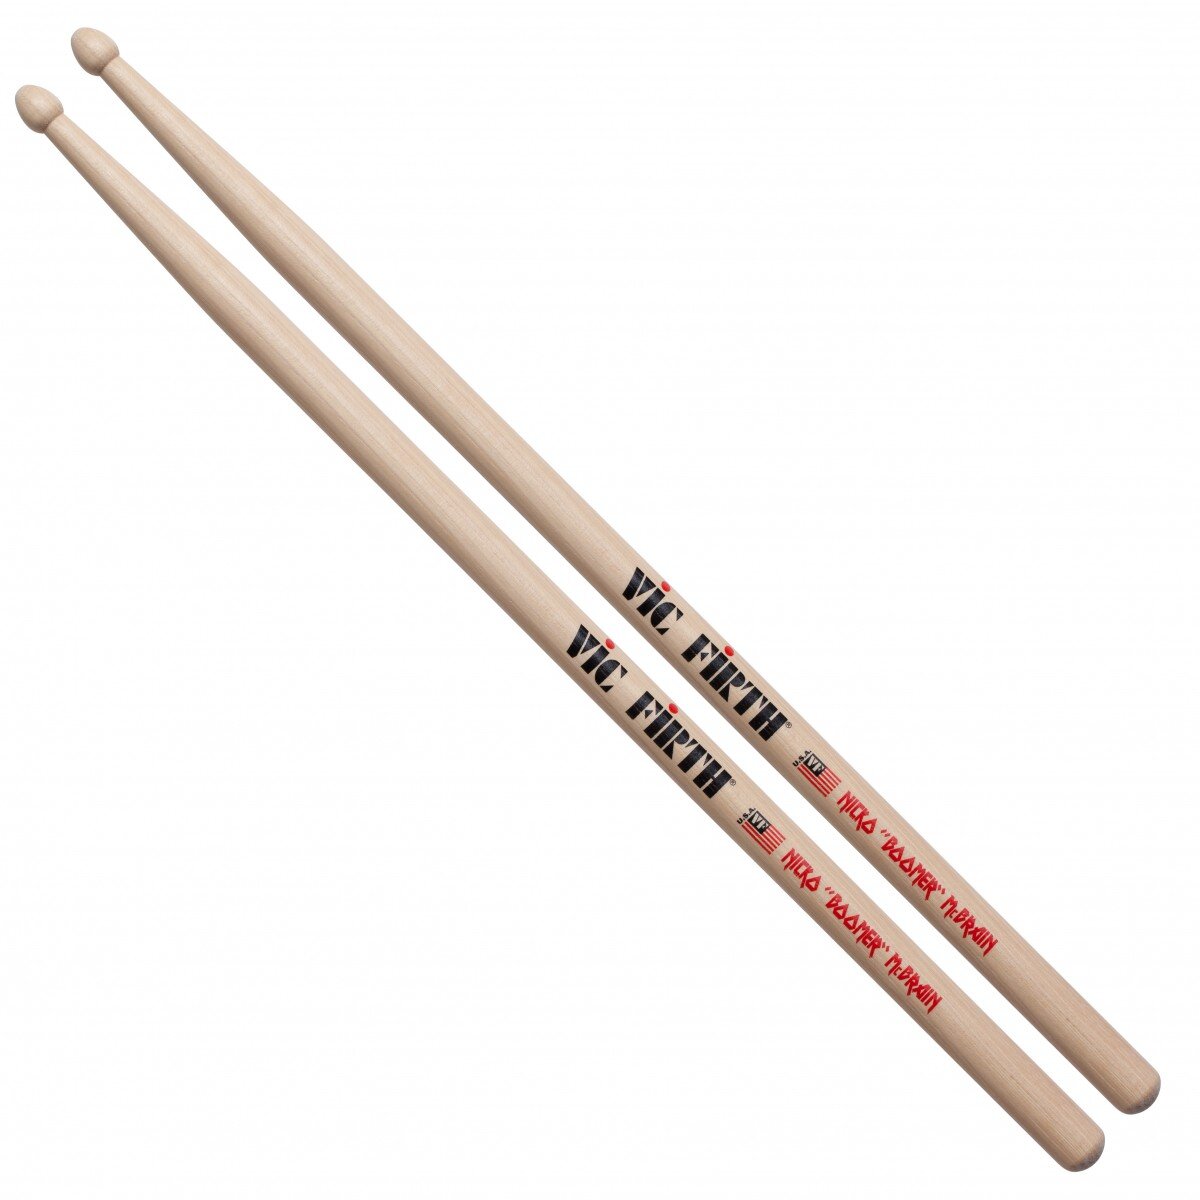 Vic Firth Signature Nicko McBrain SNM L = 406 mm D = 151 mm Wood Tip : photo 1